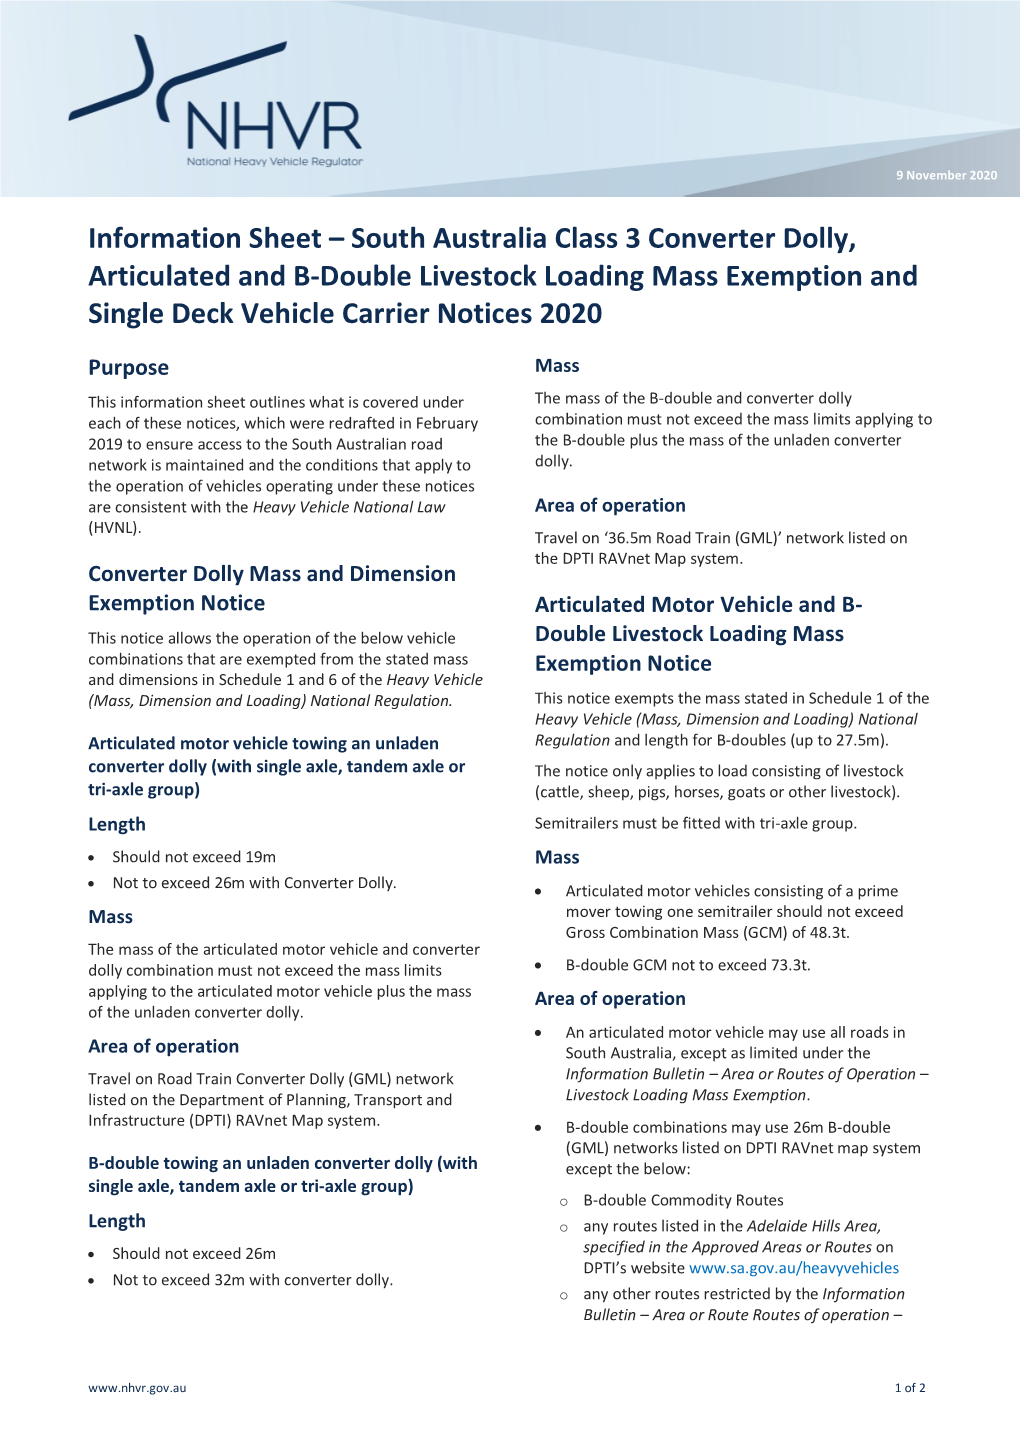 South Australia Class 3 Converter Dolly, Articulated and B-Double Livestock Loading Mass Exemption and Single Deck Vehicle Carrier Notices 2020